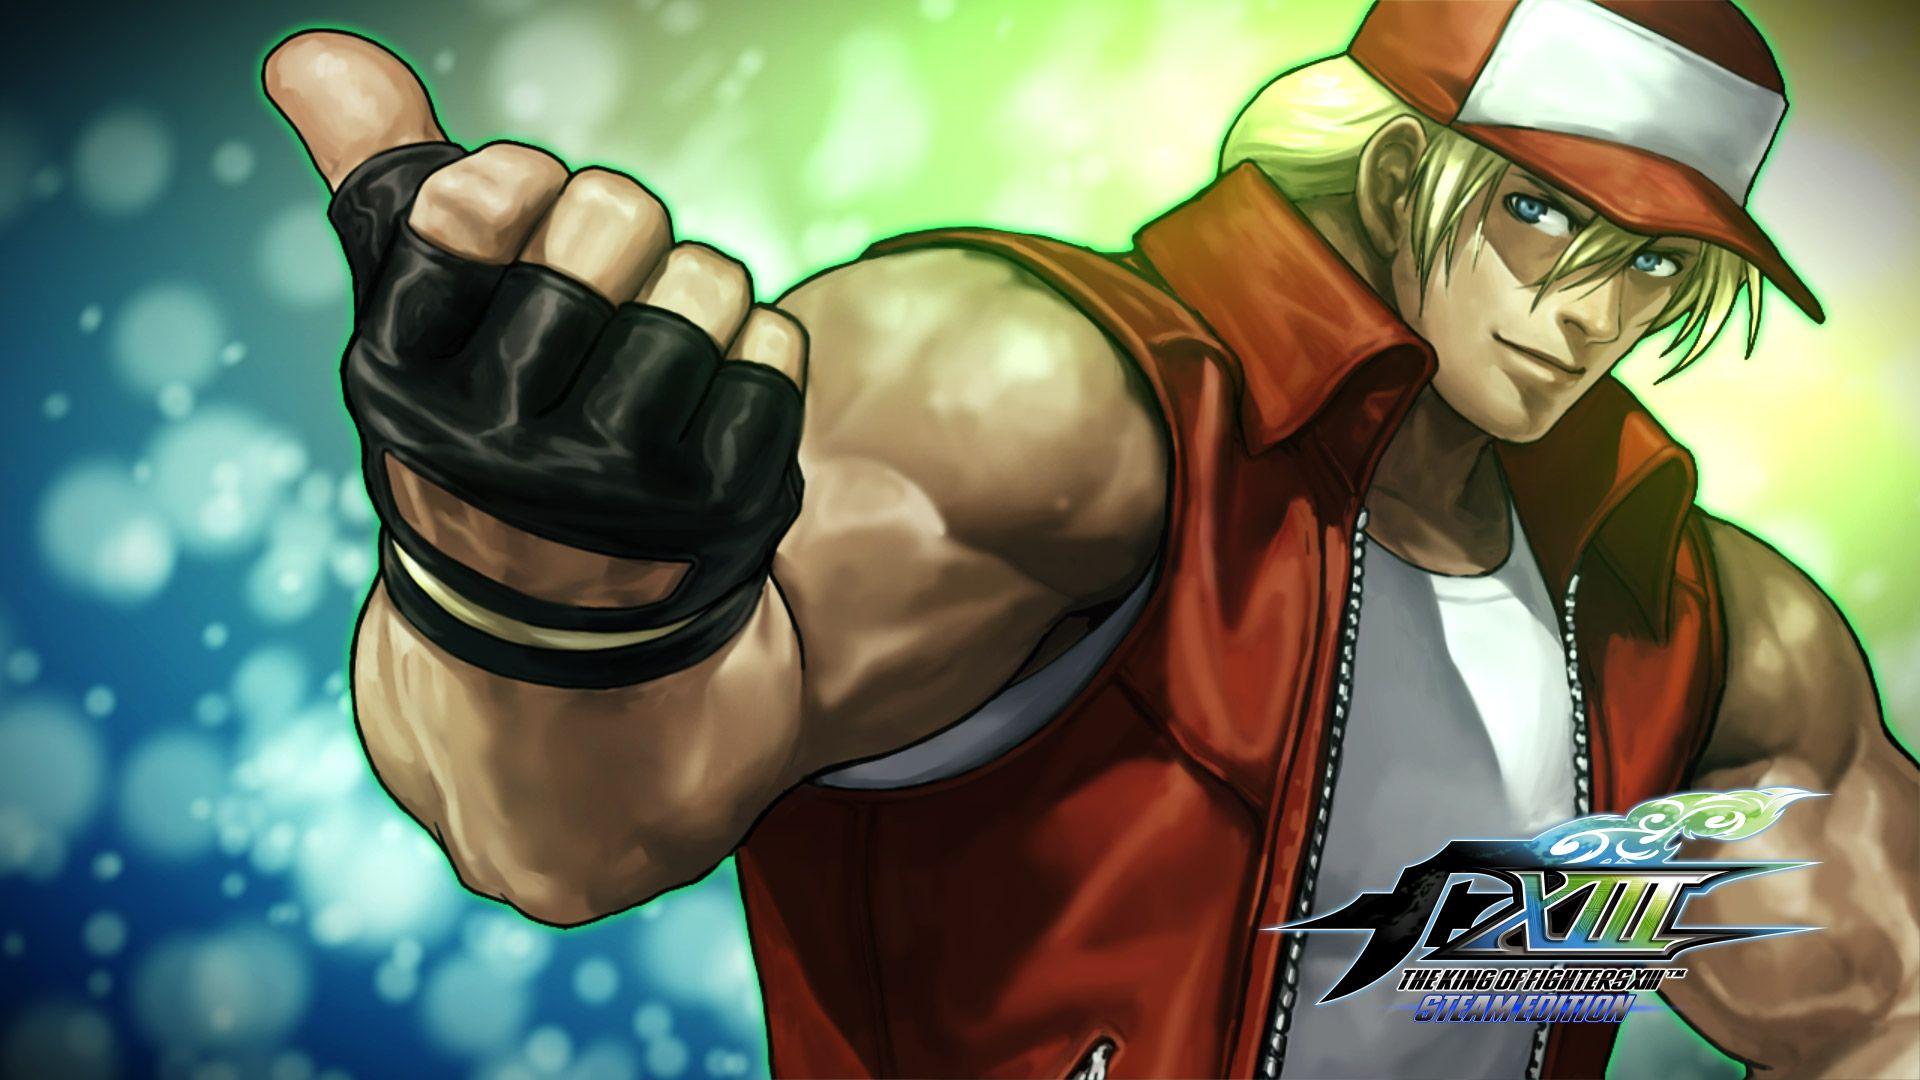 THE KING OF FIGHTERS XIII Artwork. Steam Trading